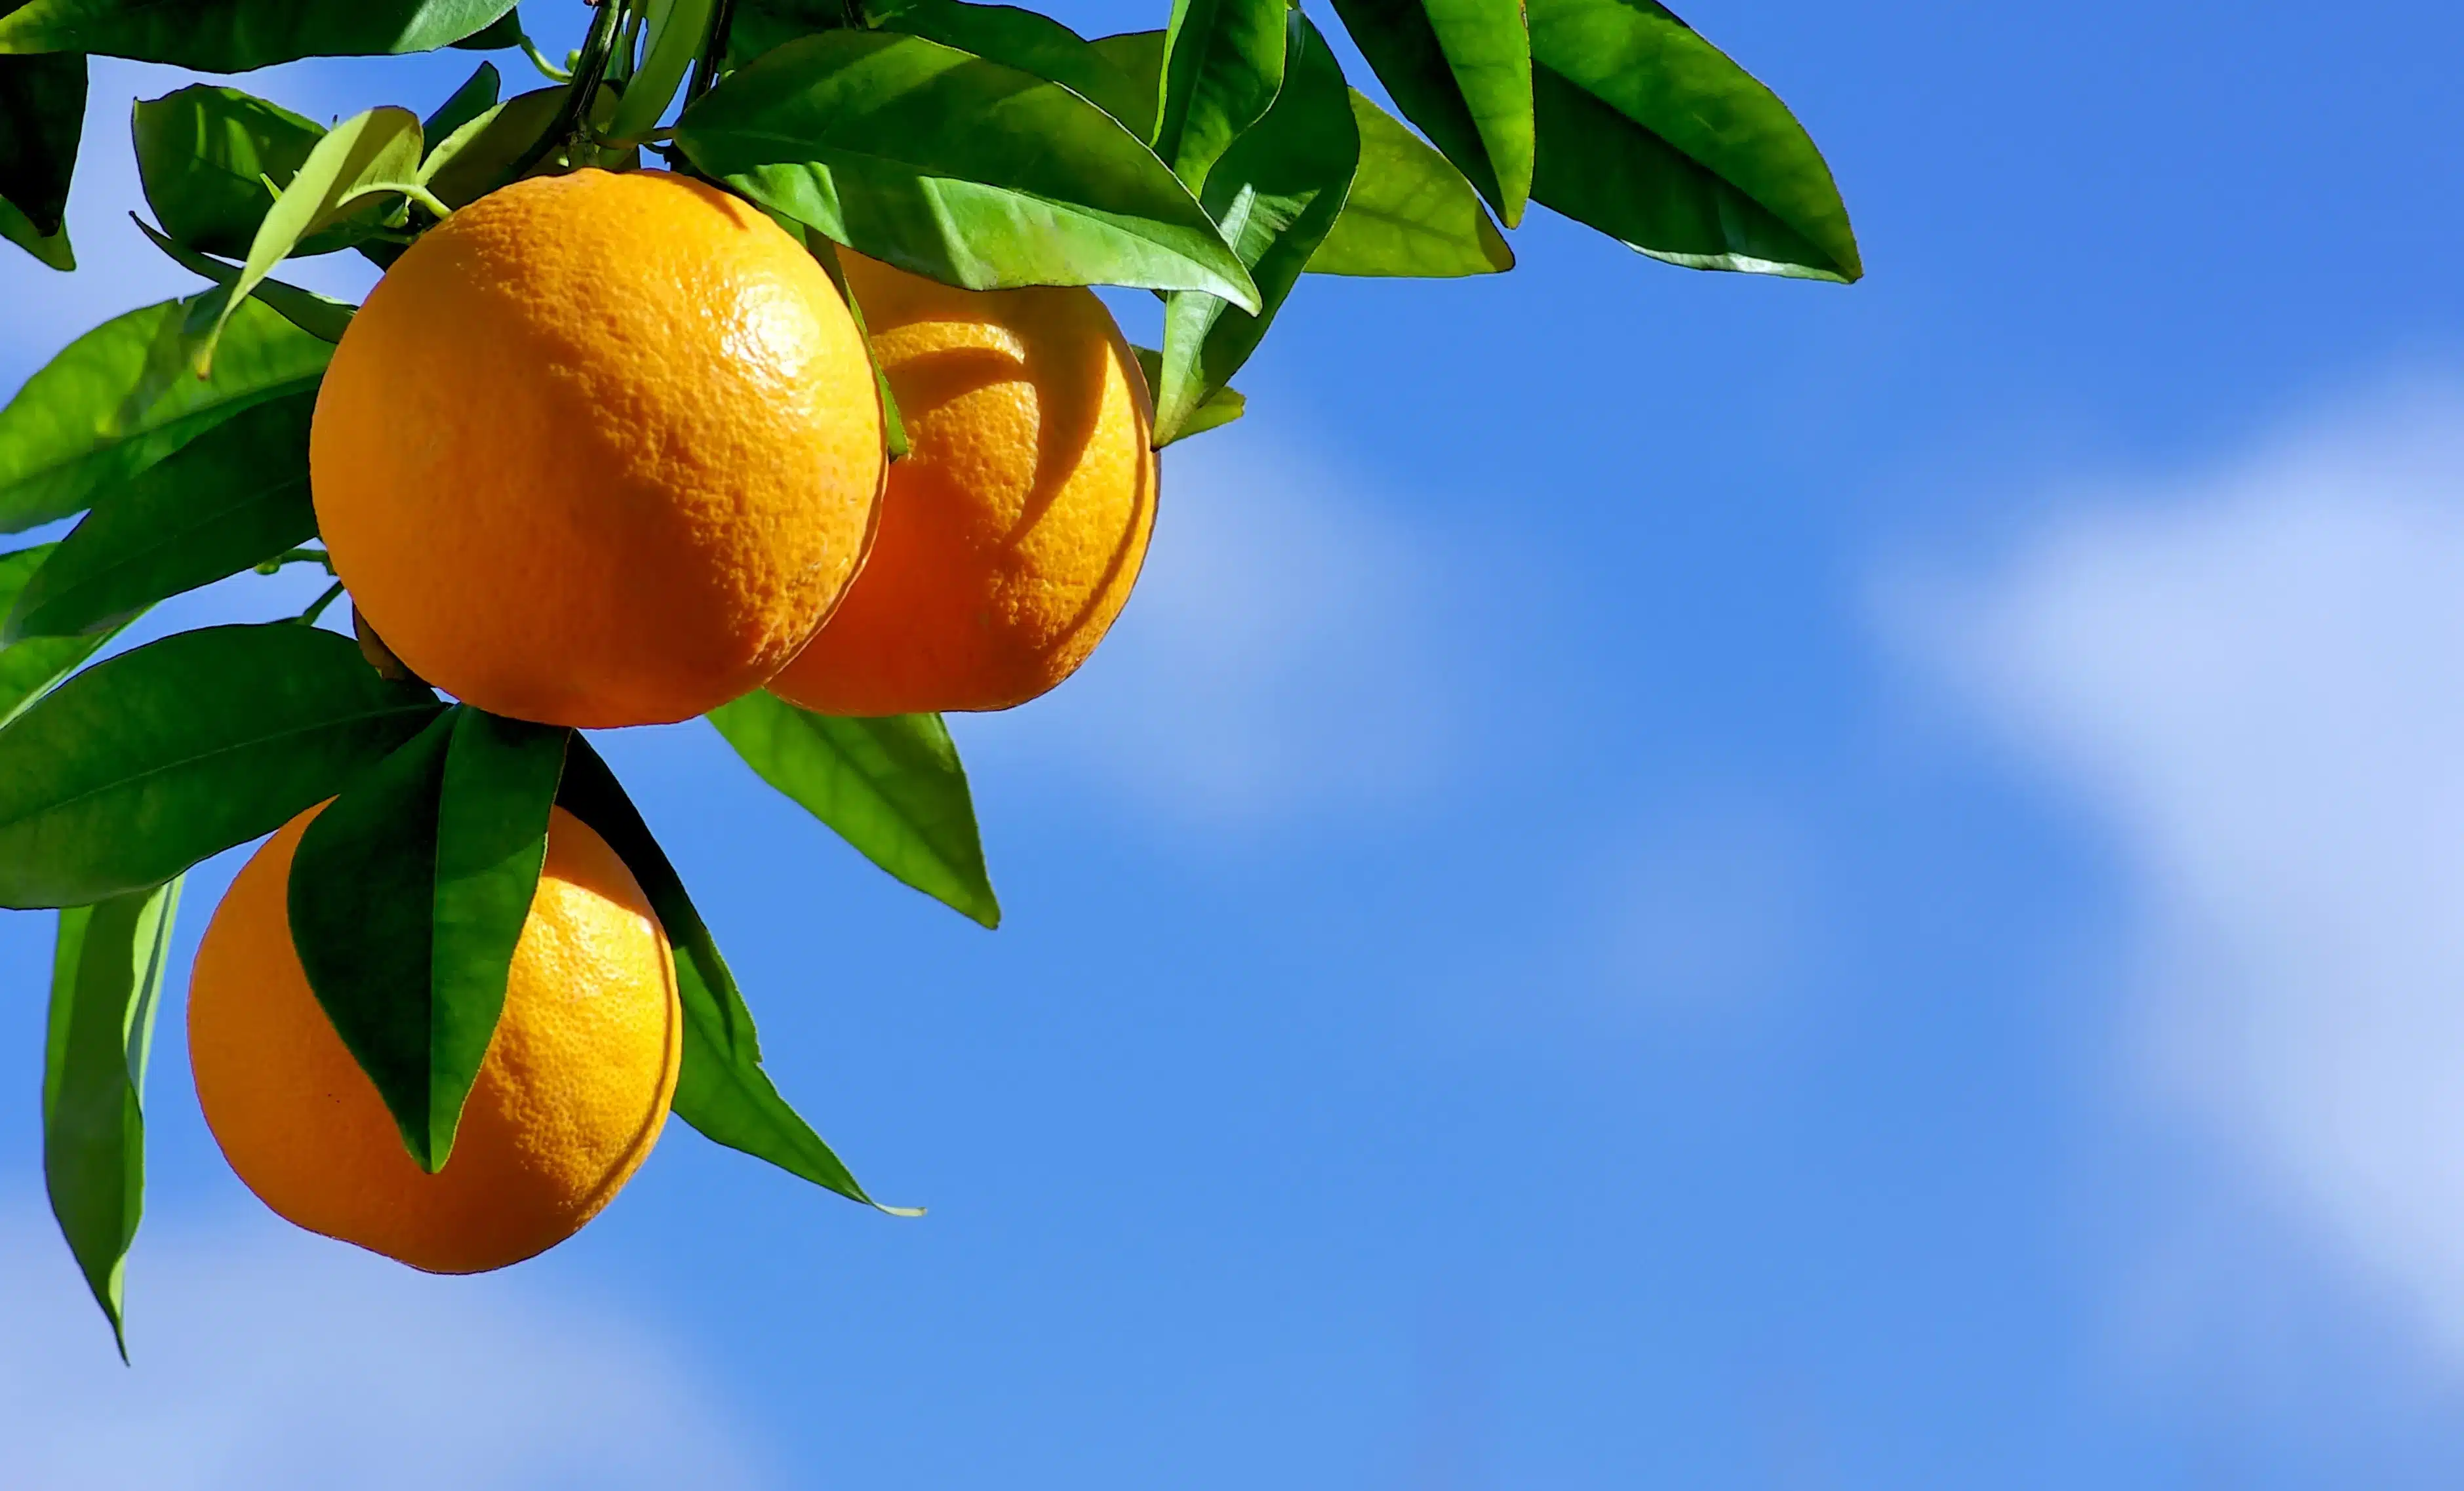 Oranges on a Branch Against the Blue Sky to Represent the Weed Strain That Starts With F Florida Orange